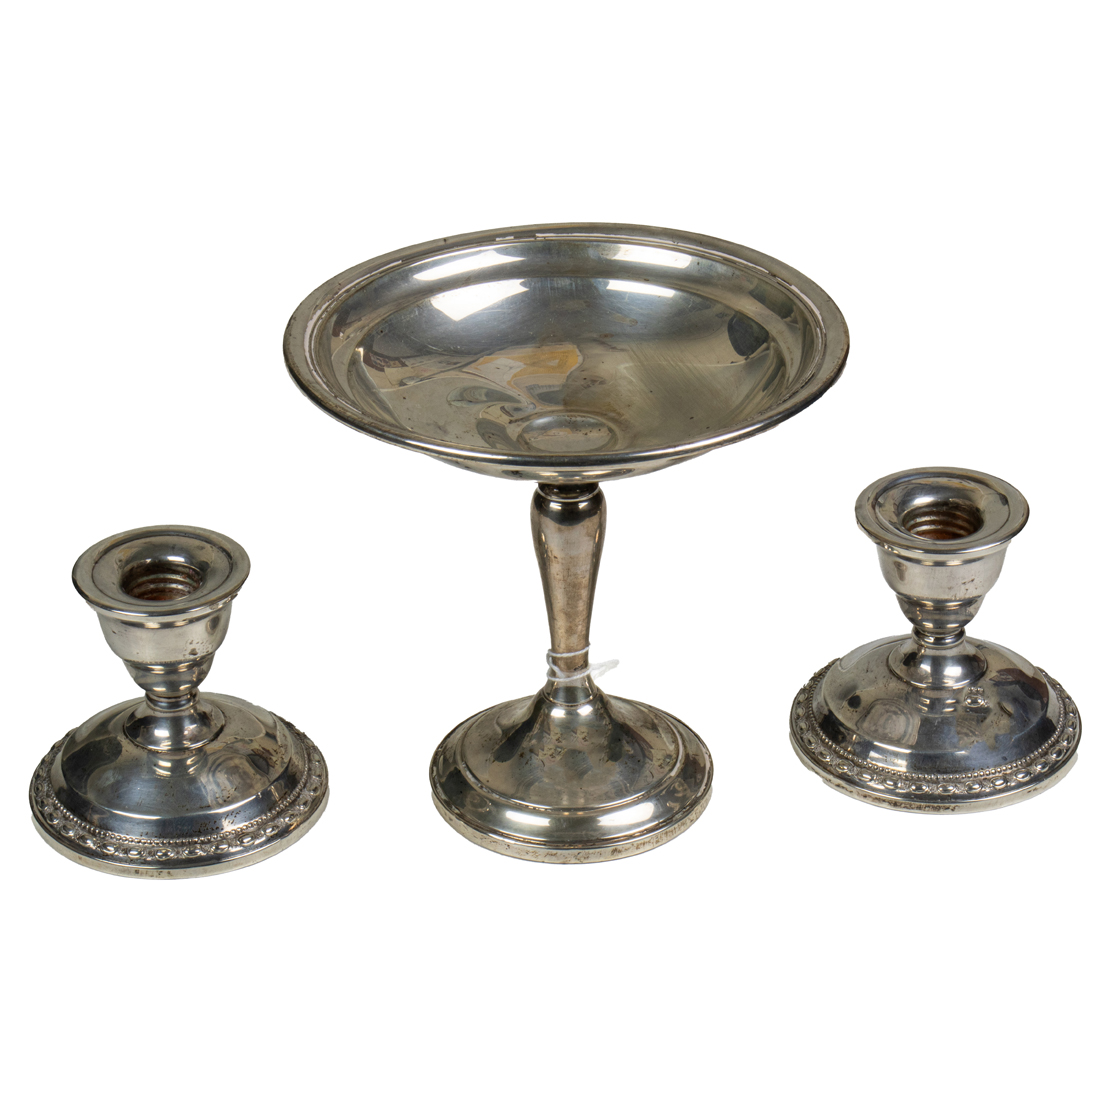 A GORHAM STERLING WEIGHTED COMPOTE